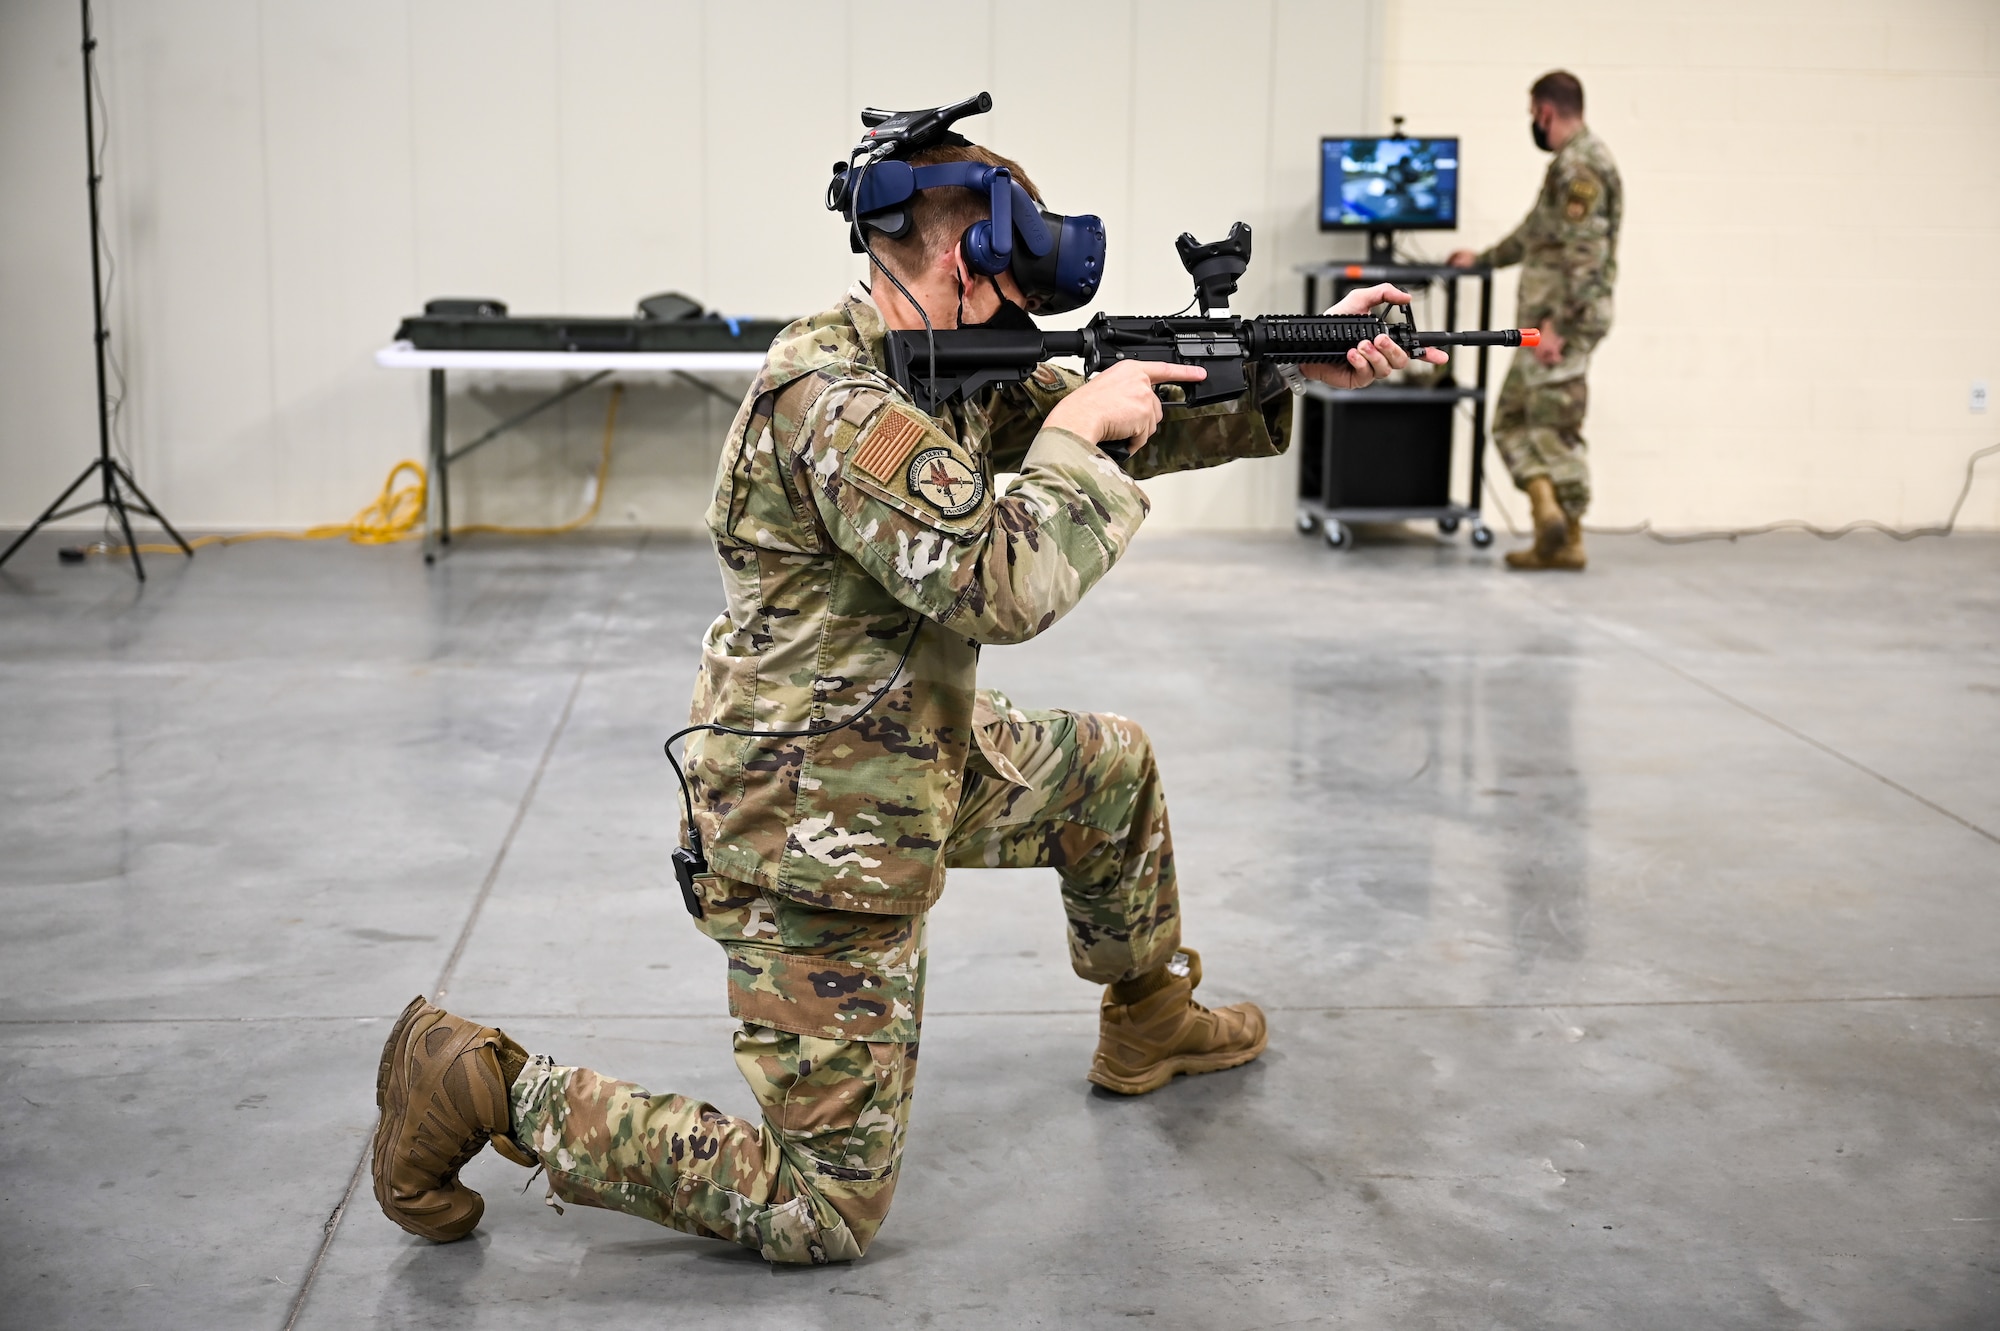 Tech. Sgt. Andrew Schnacker, 75th Security Forces Squadron, during a use-of-force response scenario with the Street Smarts Virtual Reality system. The squadron recently implemented virtual reality to fully immerse themselves into realistic three-dimensional situations to enhance their training. (U.S. Air Force photo by Cynthia Griggs)